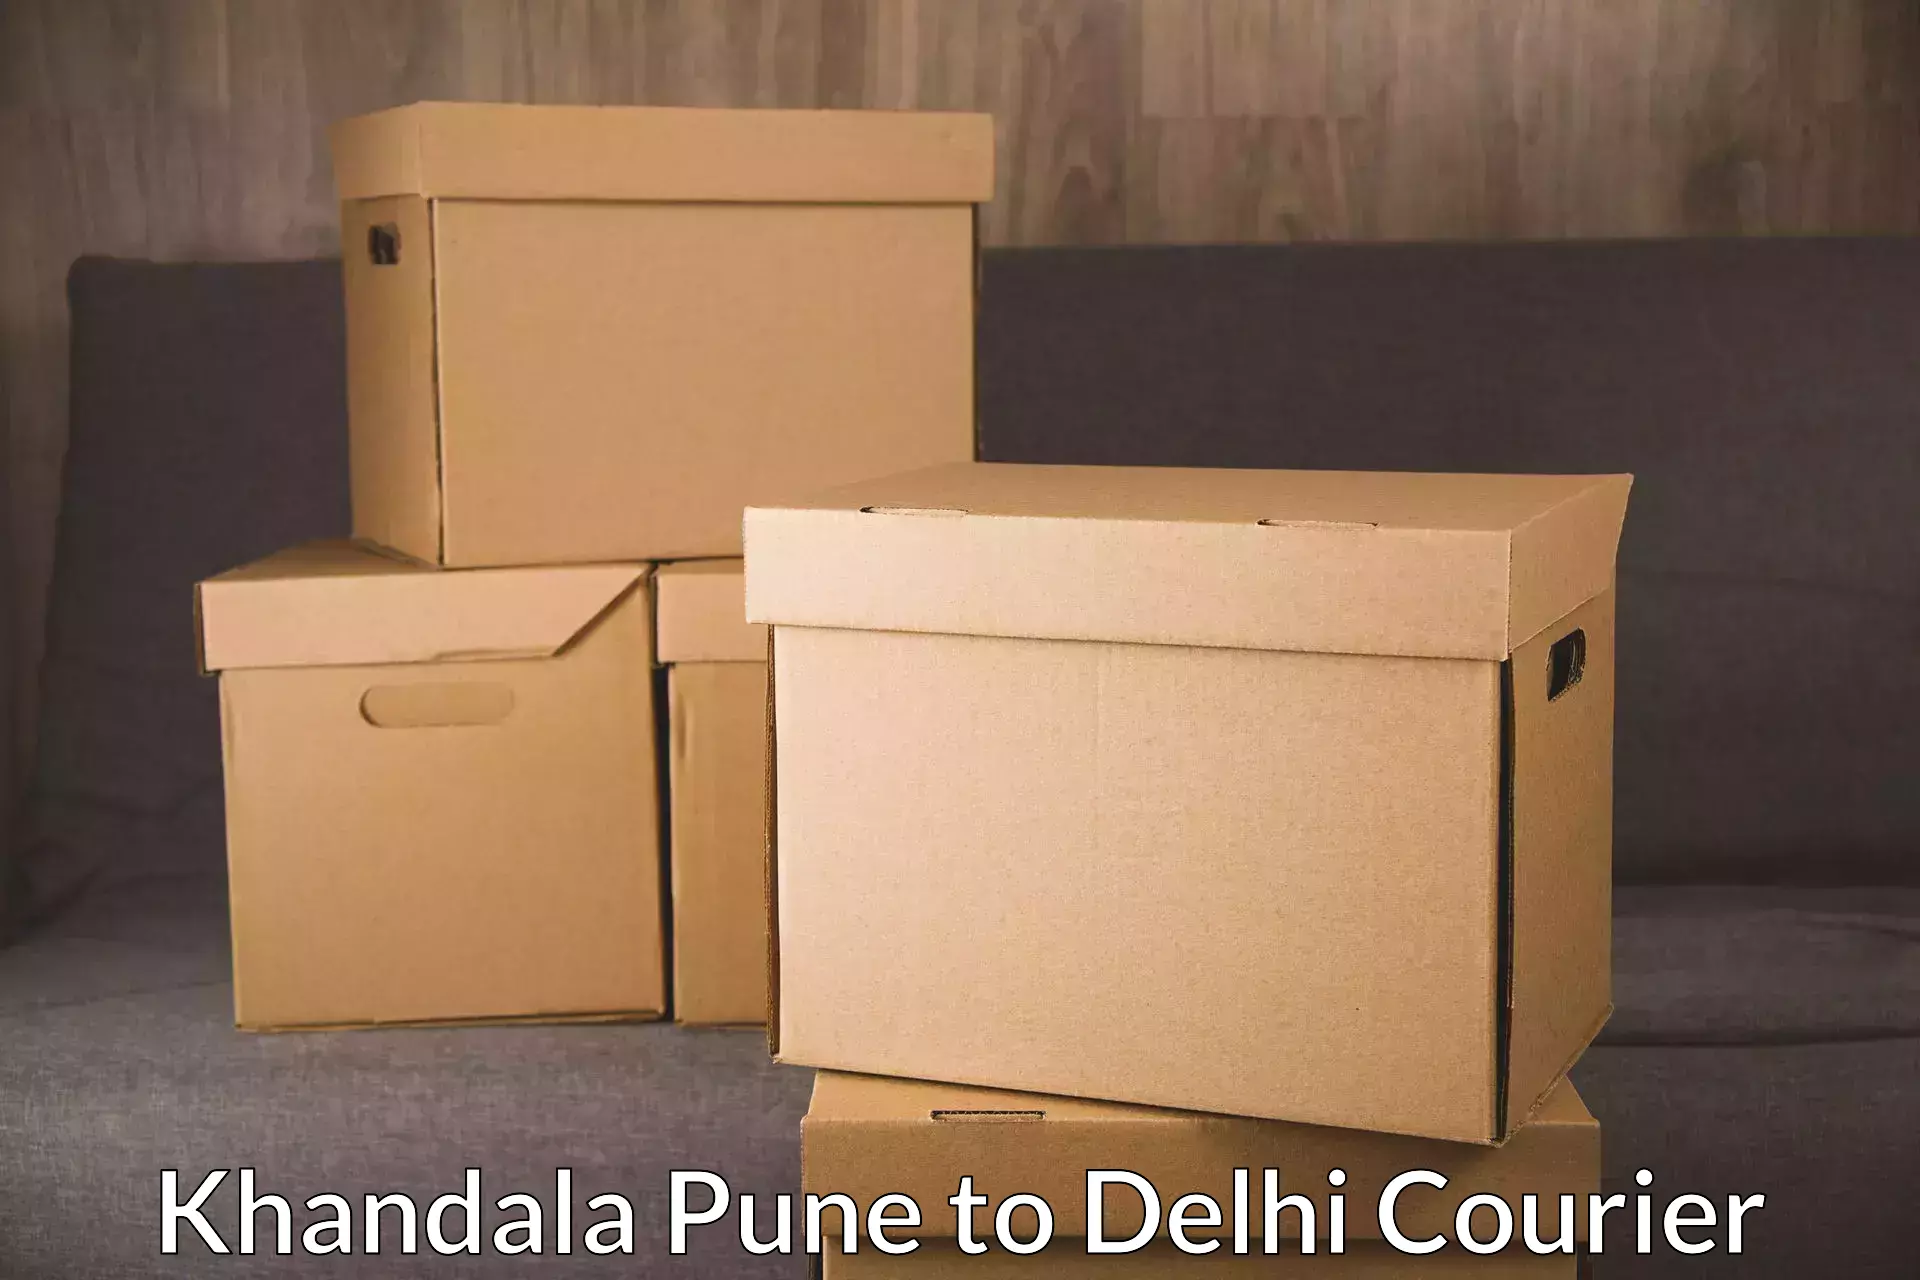 Advanced shipping technology in Khandala Pune to NCR